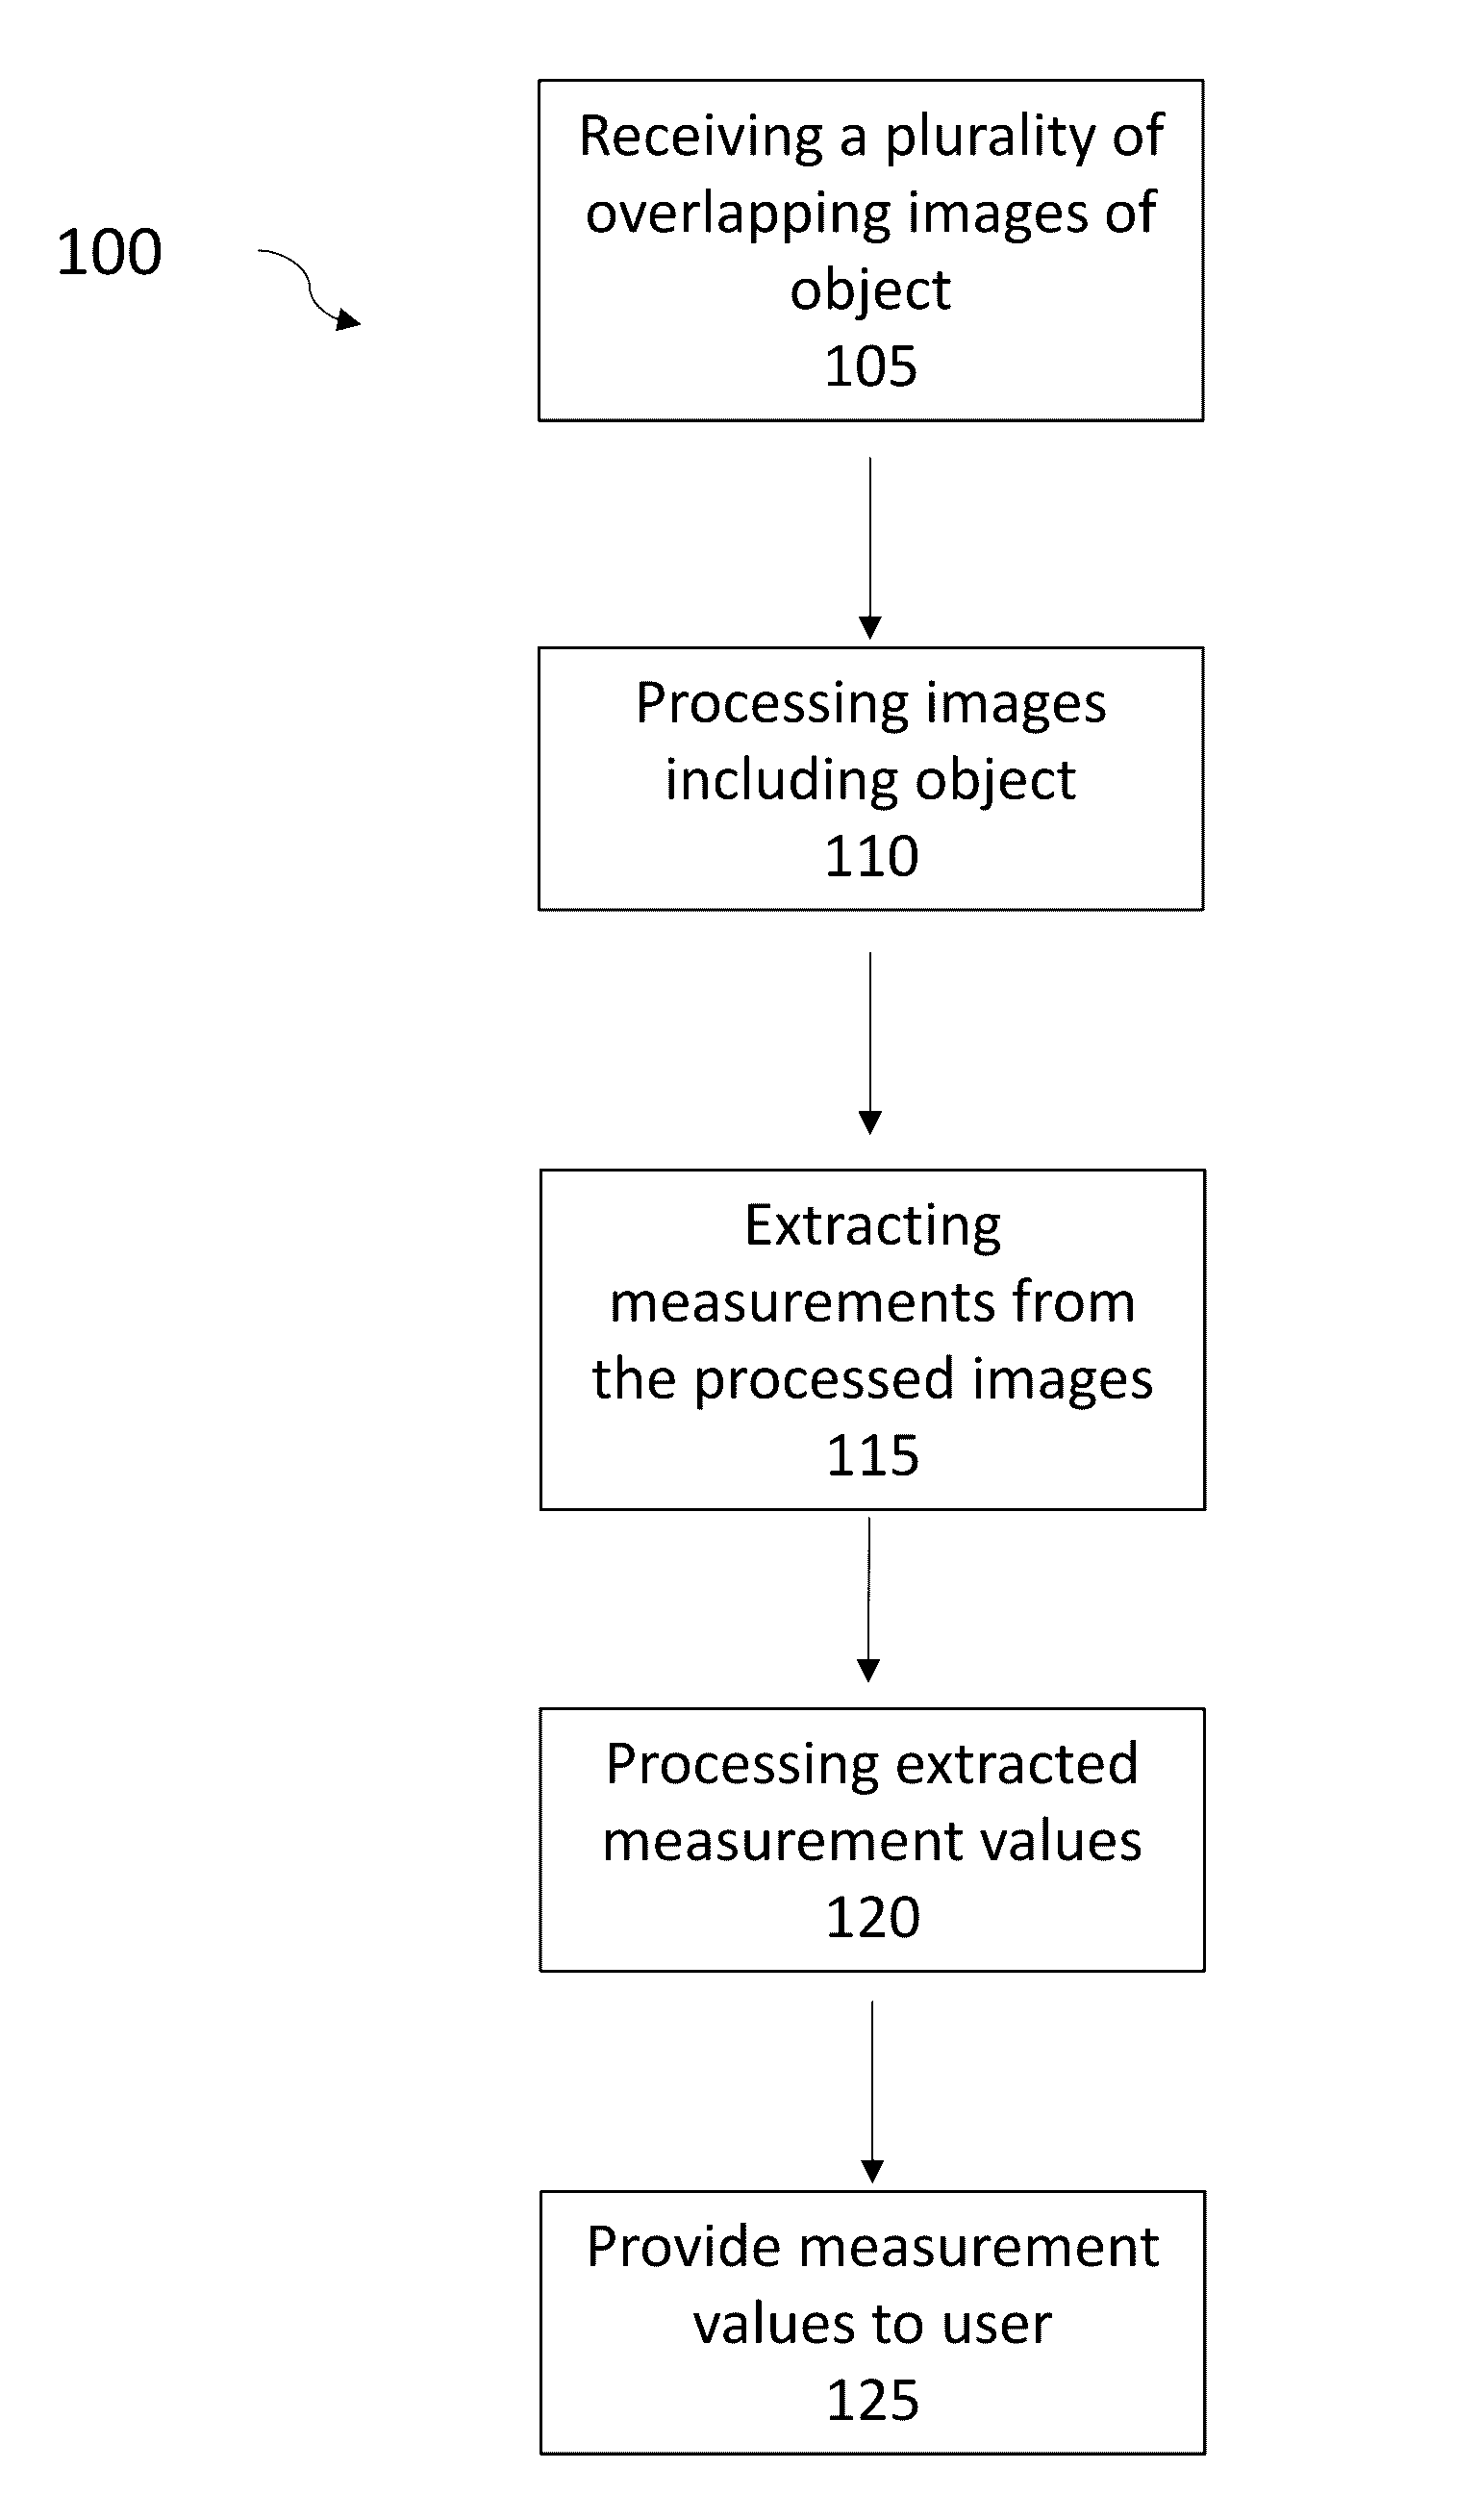 Surveying and measurement methods and devices